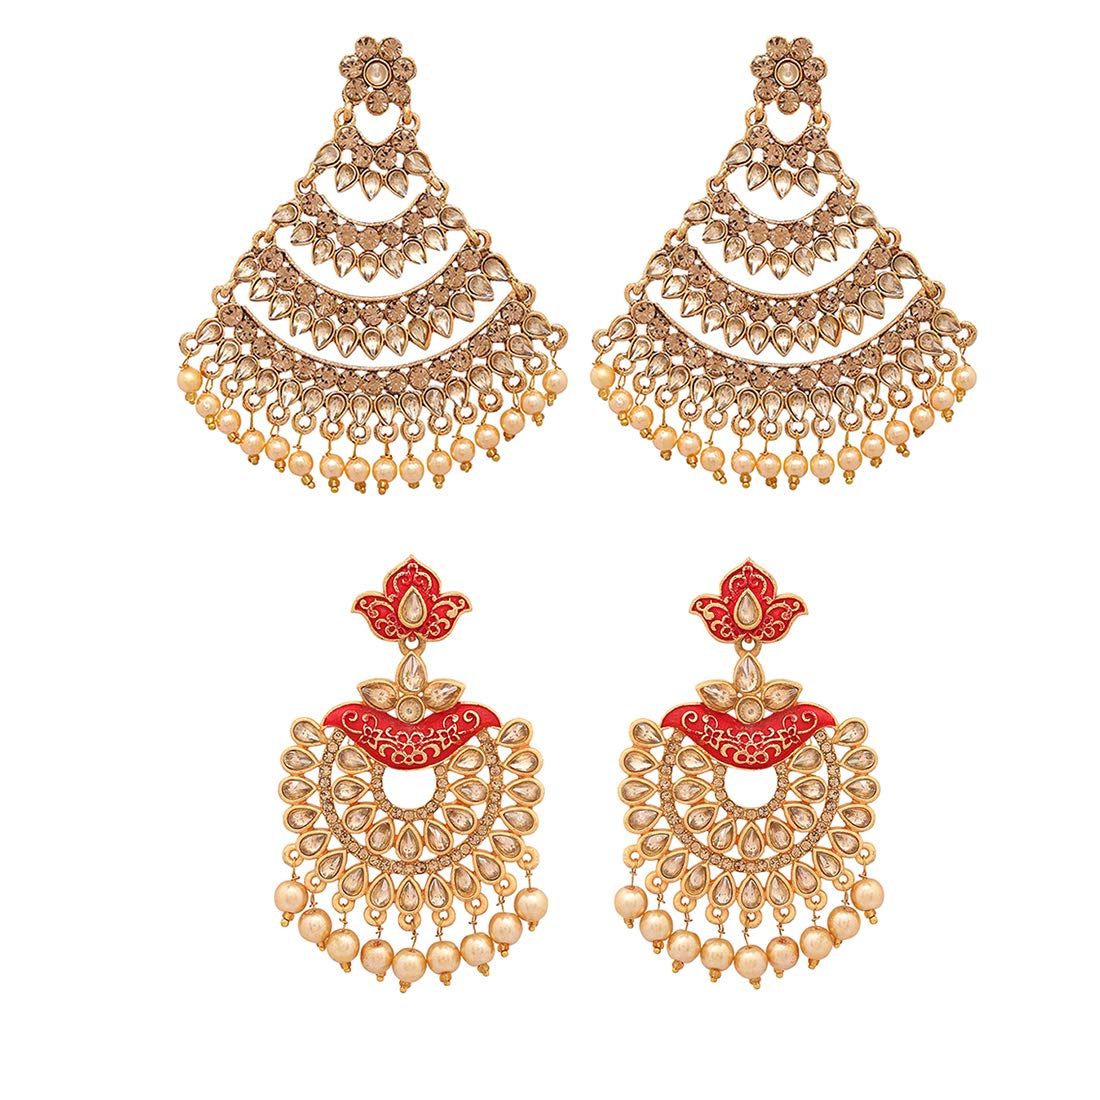 Yellow Chimes Chandbali Earrings for Women Combo of 2 Pairs Ethnic Gold Plated Matte Finish Traditional Kundan Studded Danglers Earrings for Women and Girls